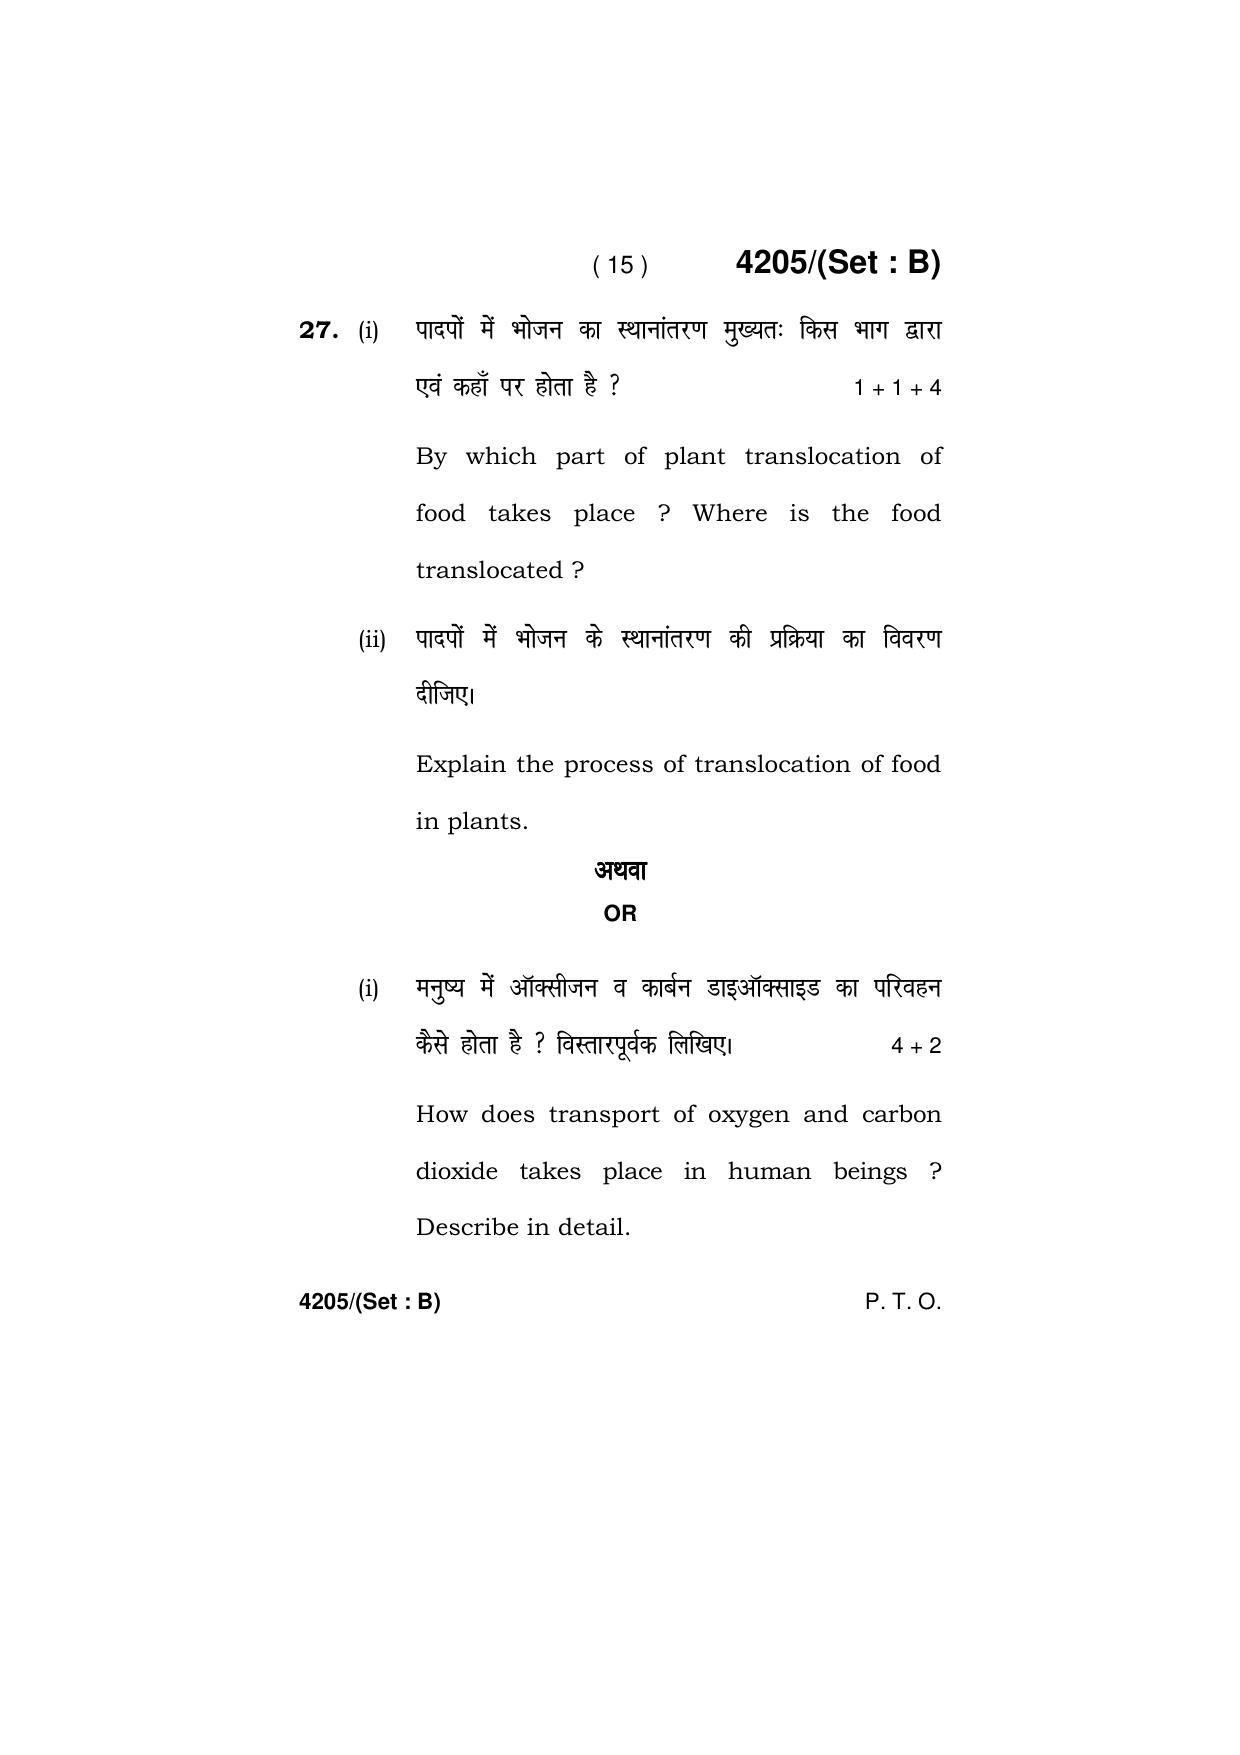 Haryana Board HBSE Class 10 Science (All Set) 2019 Question Paper - Page 31